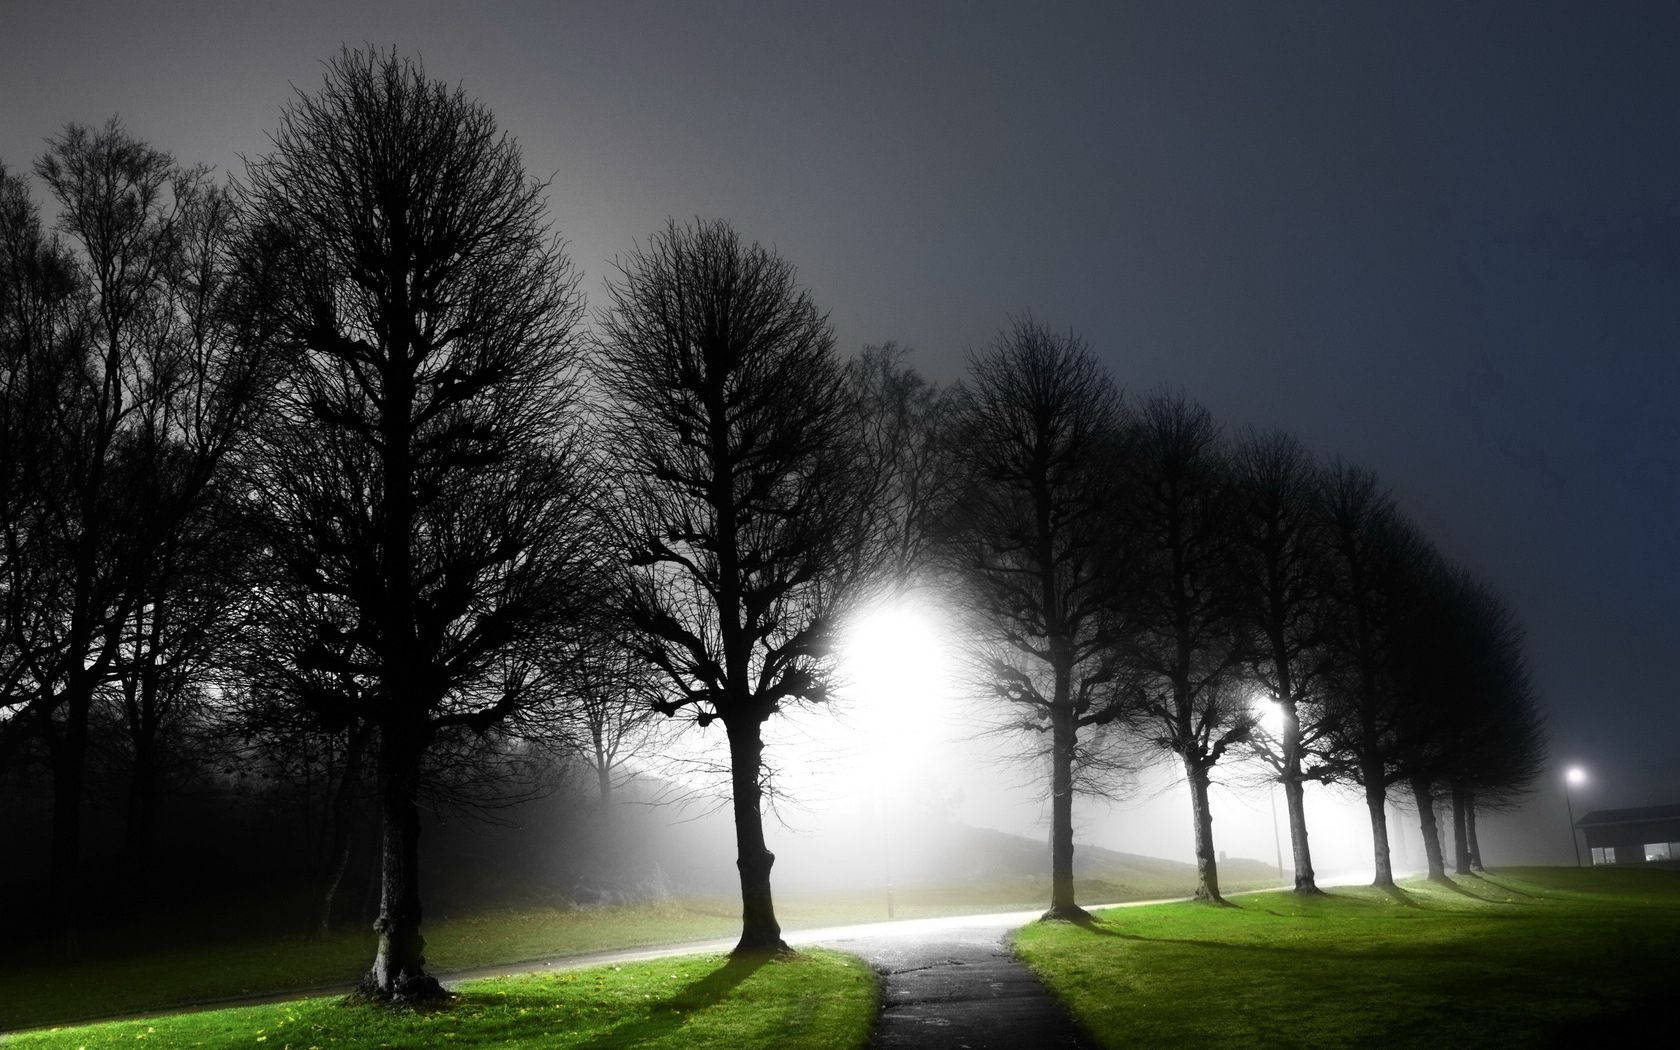 Marveling at a Magical Tree-Lined Avenue at Night Wallpaper